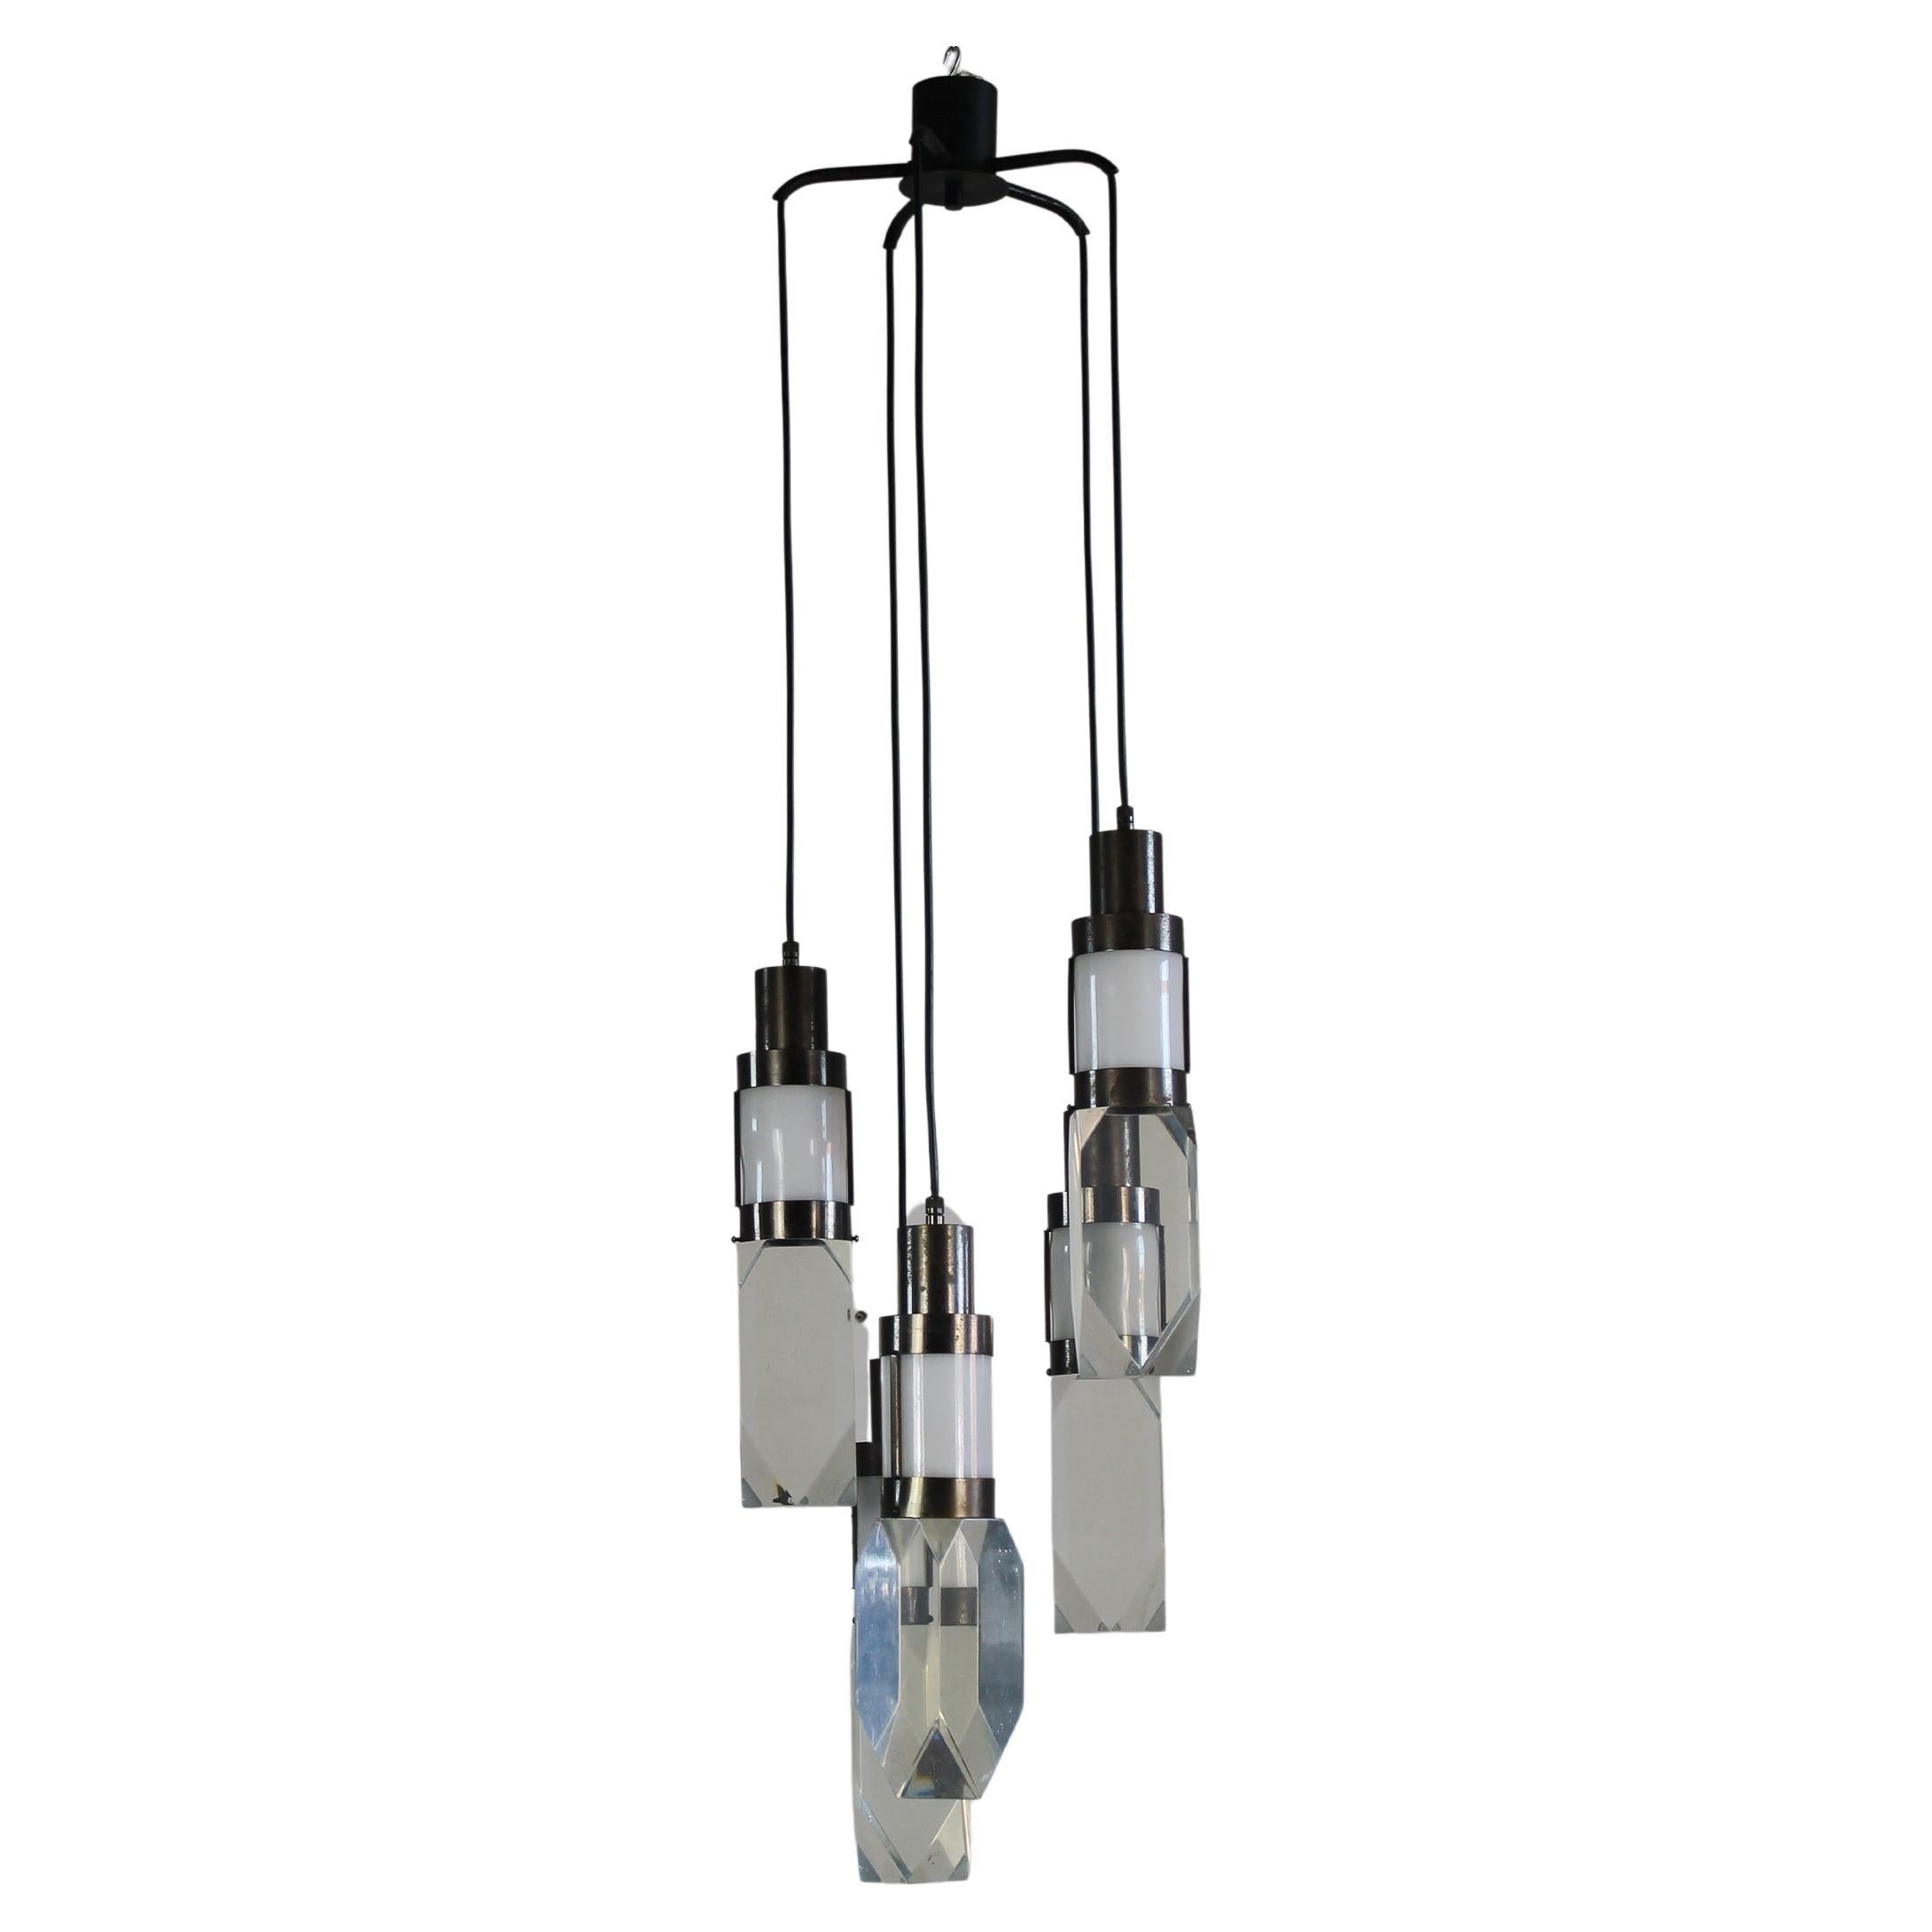 Gaetano Missaglia Ceiling Lamp with Lampshades in Lucite Plexiglass 1970s Italy For Sale